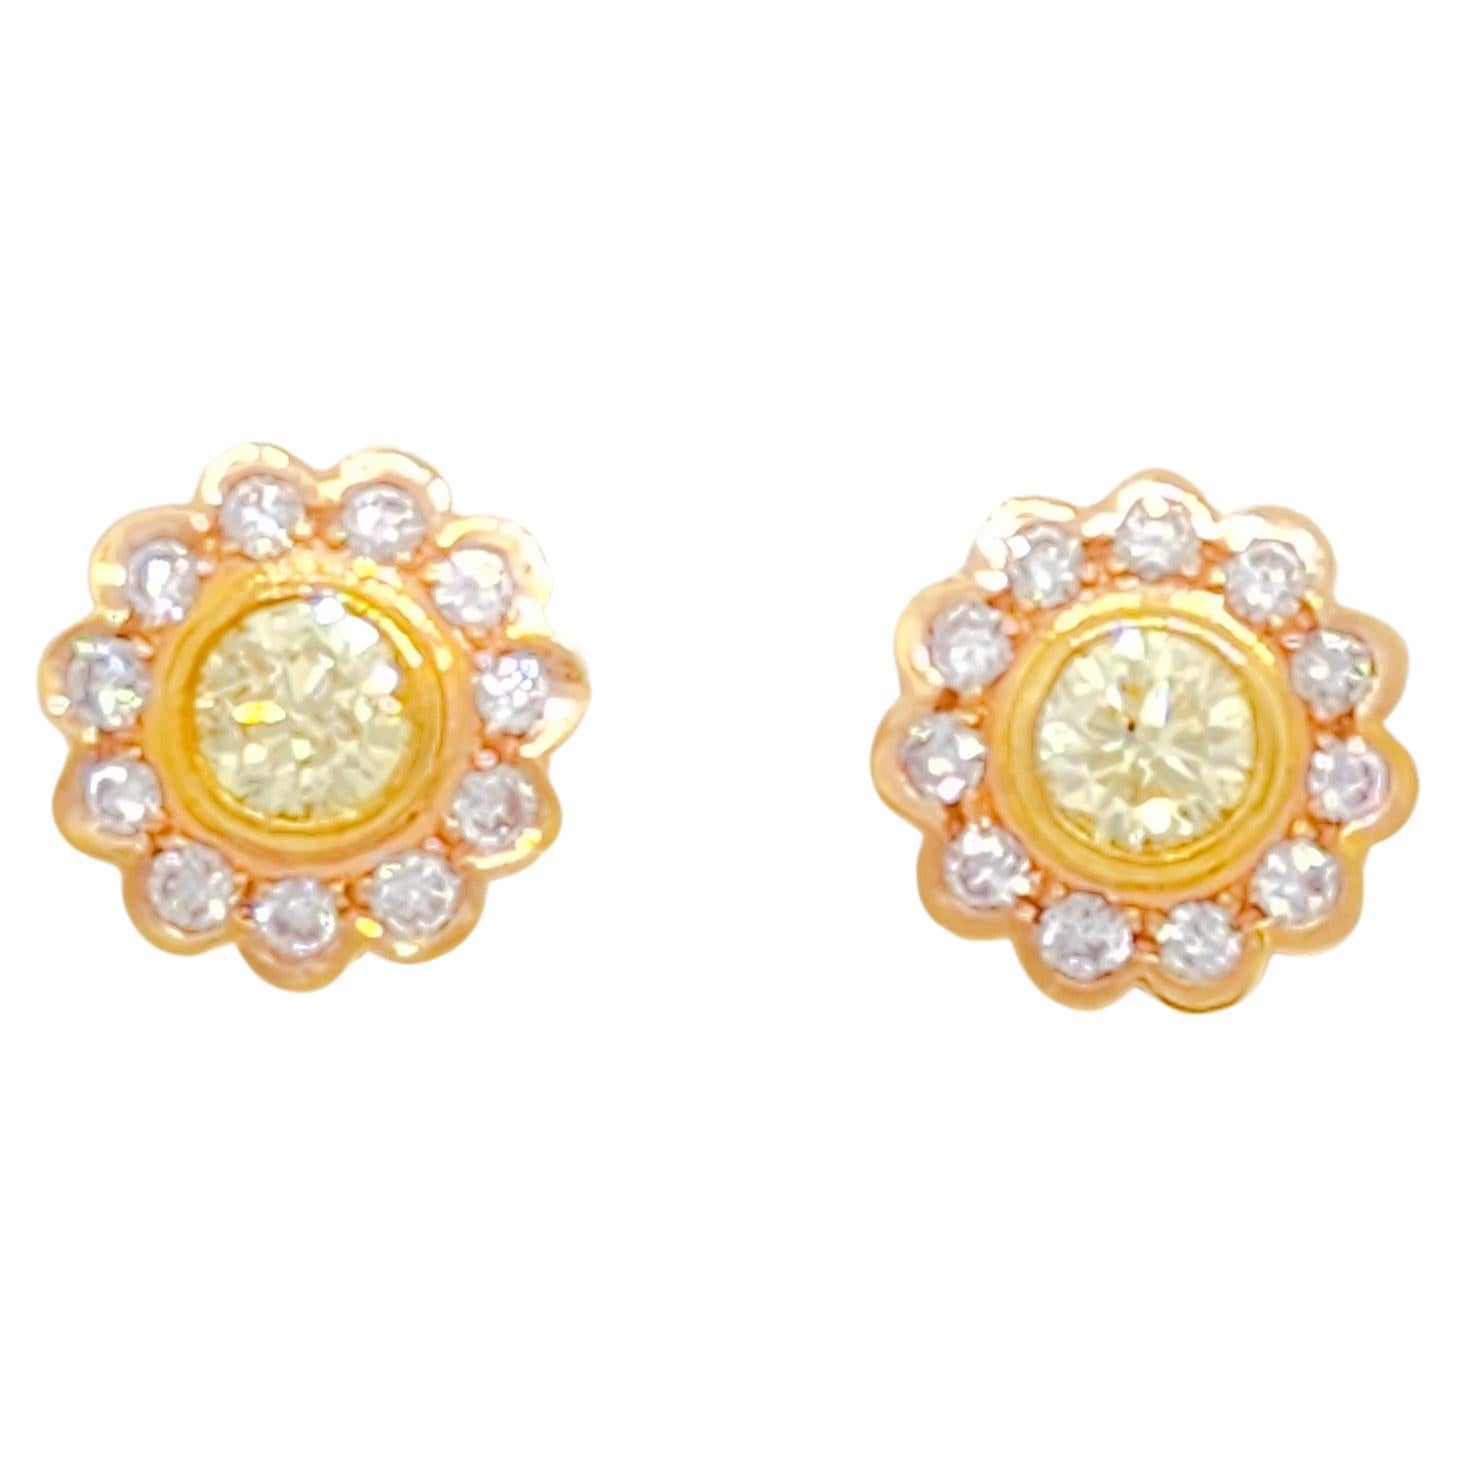 Beautiful 0.98 ct. bright yellow diamond rounds with 0.70 ct. good quality pink diamond rounds.  Handmade in a floral design and in 18k white and rose gold.  Push back setting.